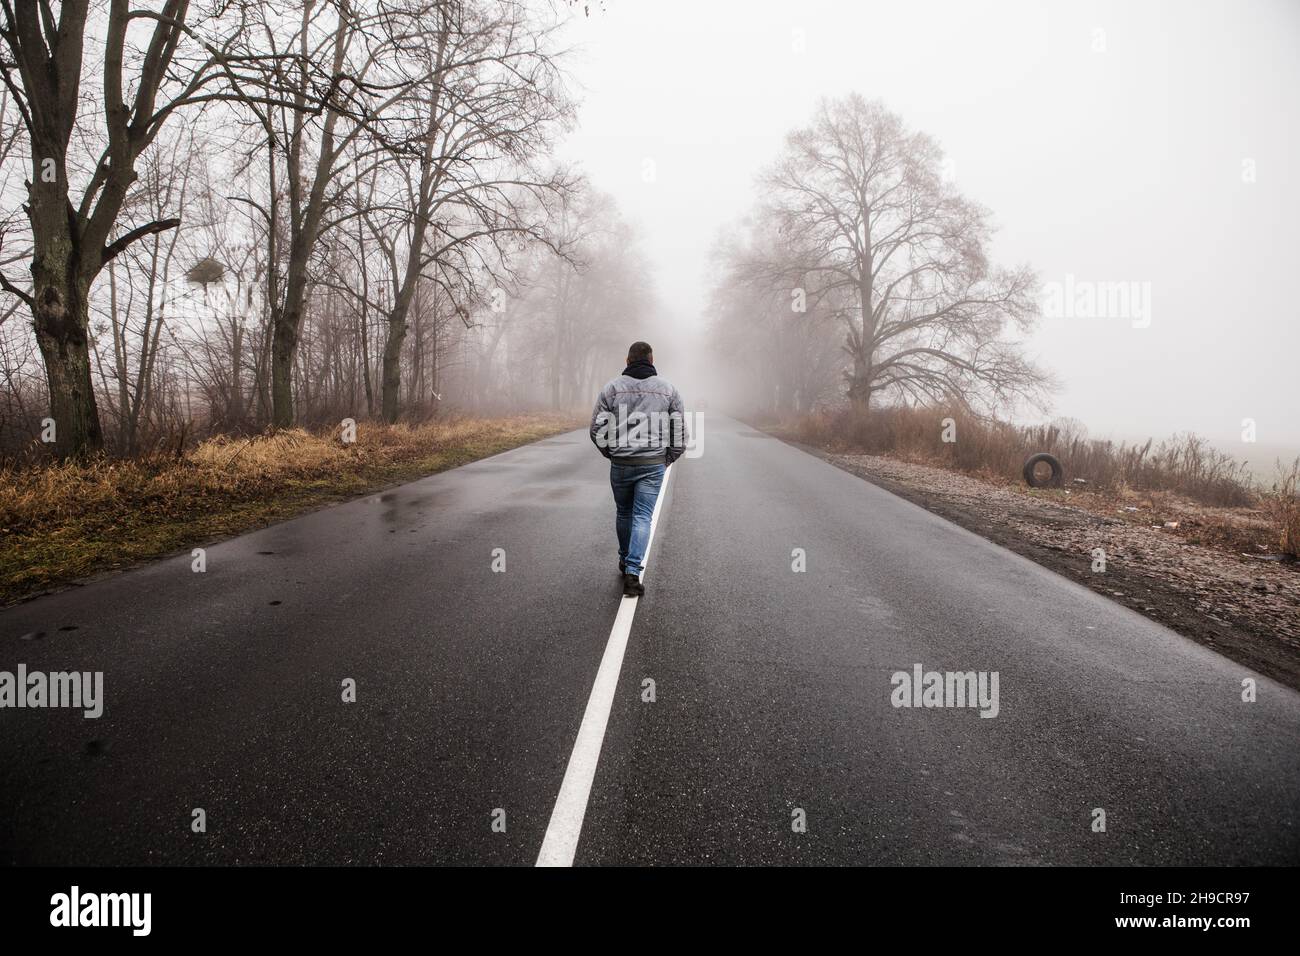 Lonly man  walk away into the misty foggy road in a dramatic mystic scene. Guy walking in a foggy autumn landscape Stock Photo